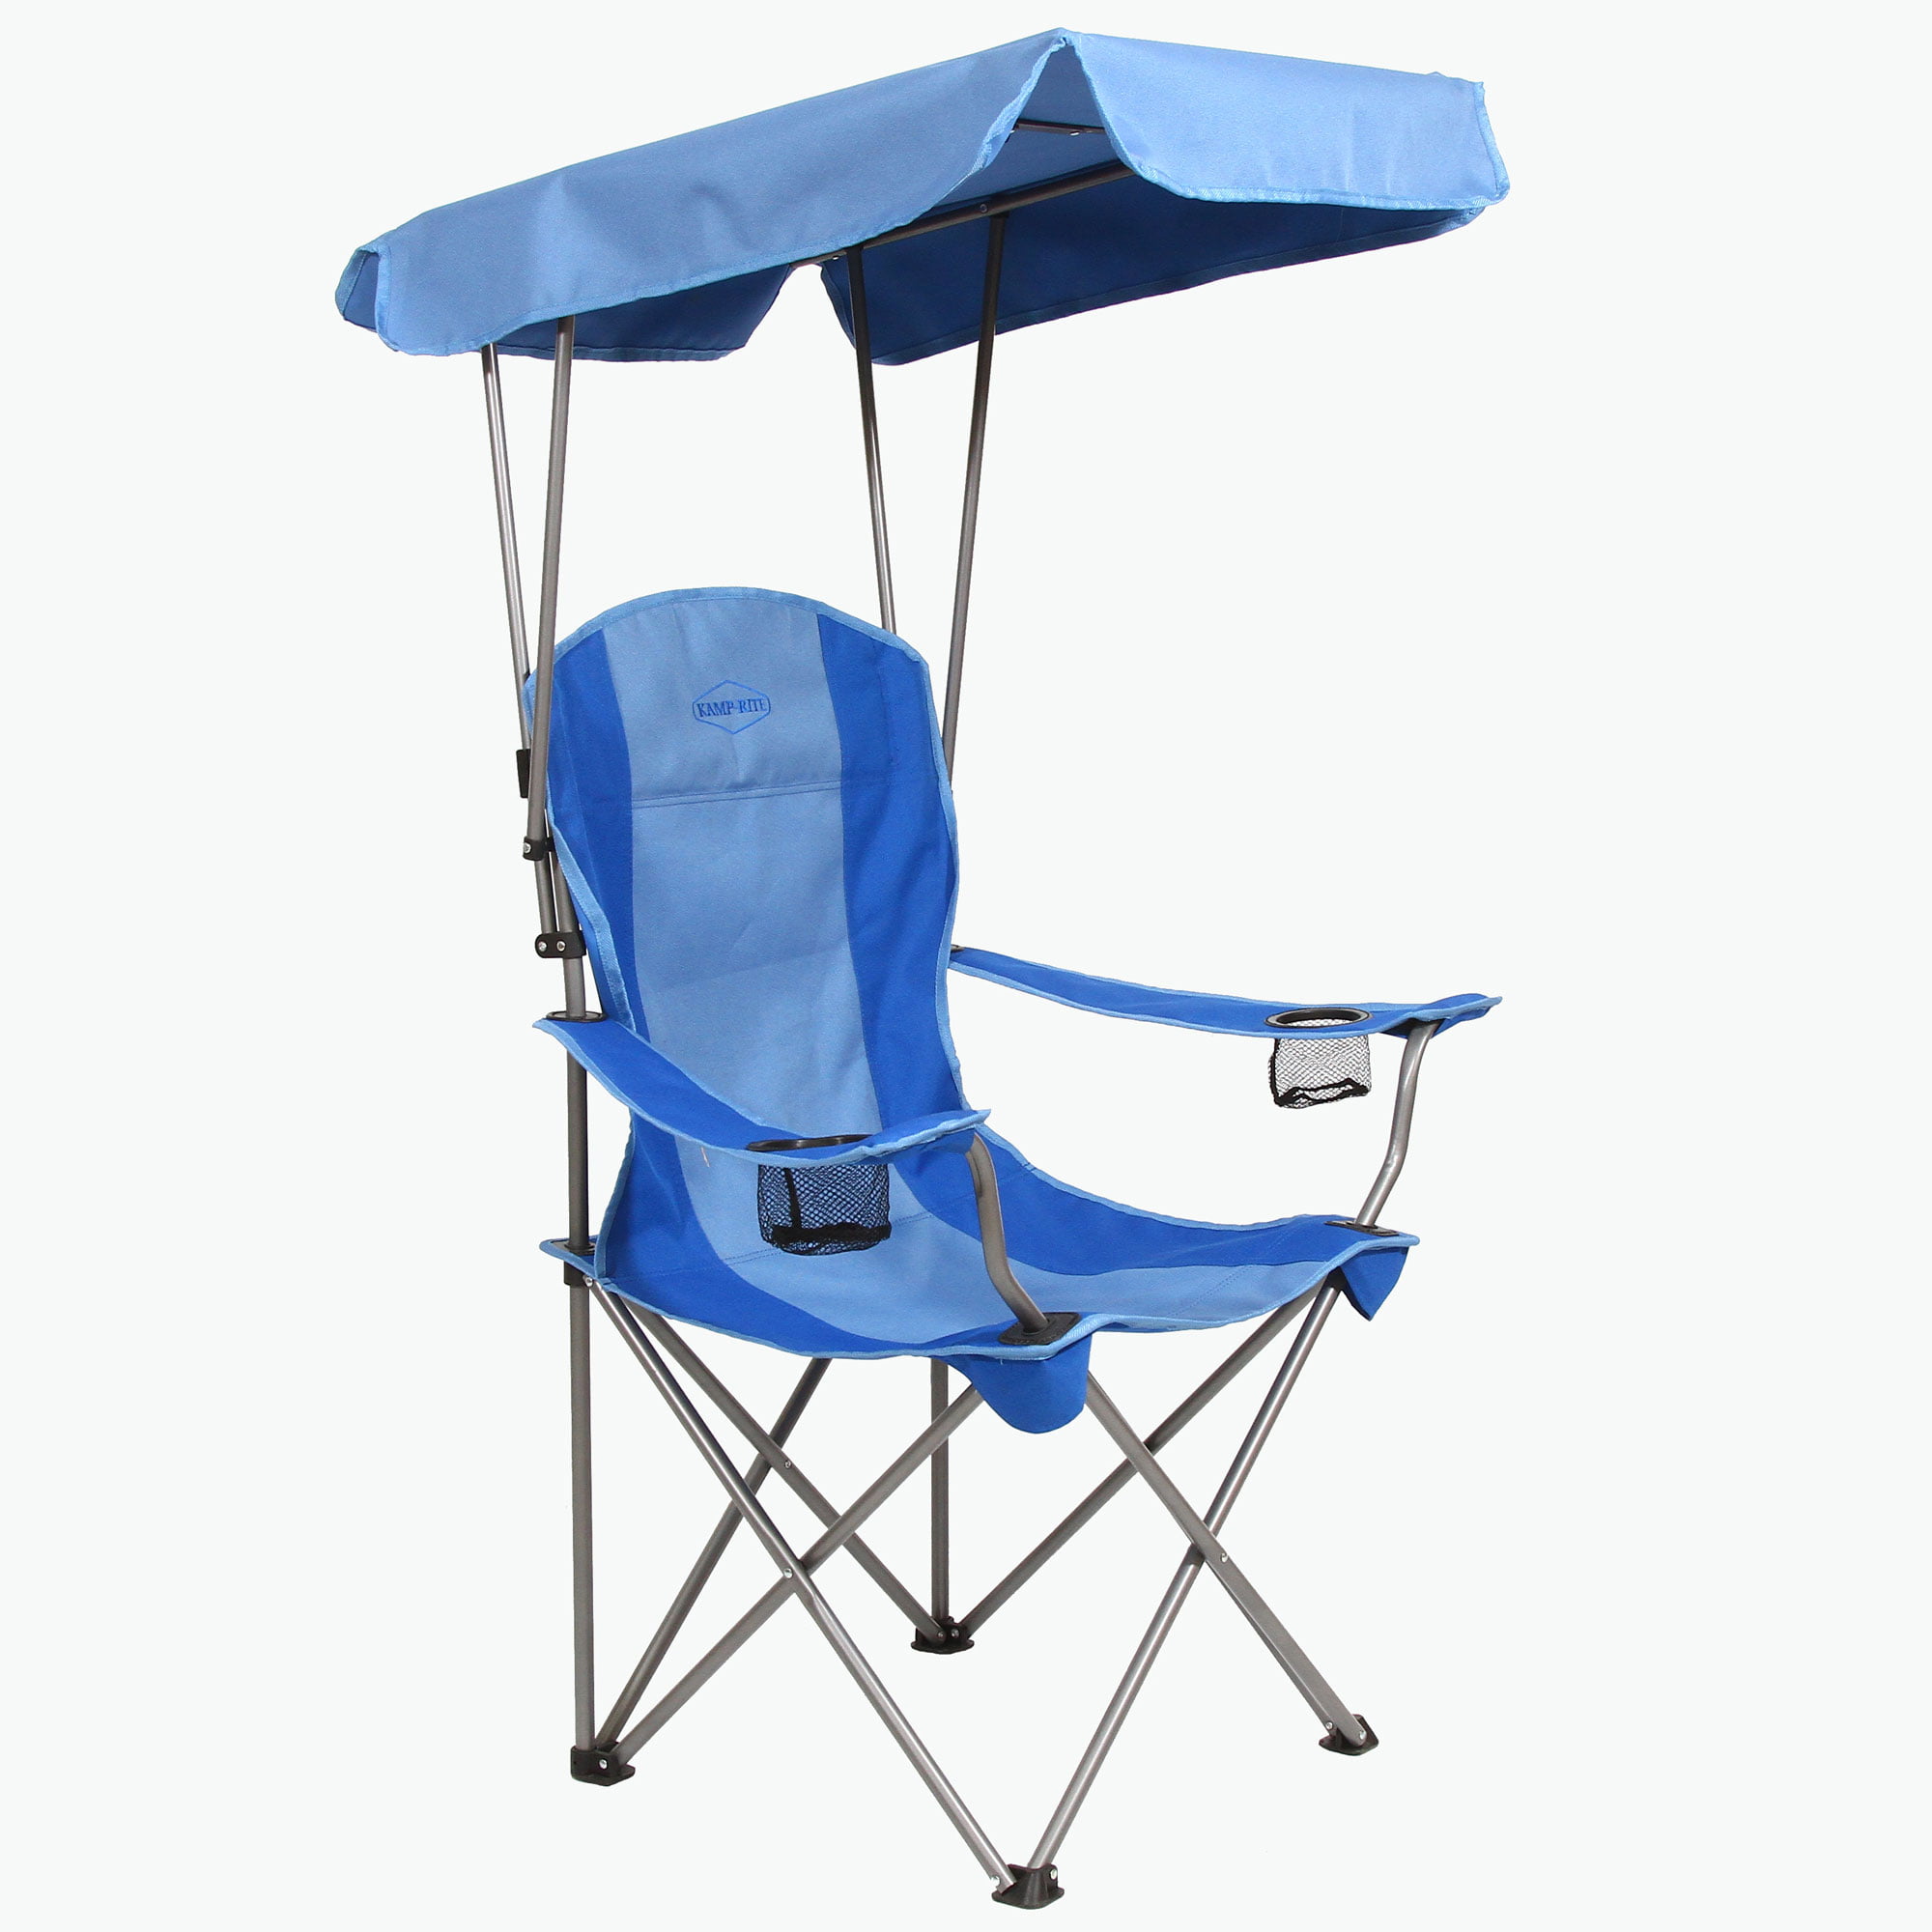 Khaki/Gray Quik Shade Max Shade High and Wide Folding Camp Chair with Tilt UV Sun Protection Canopy